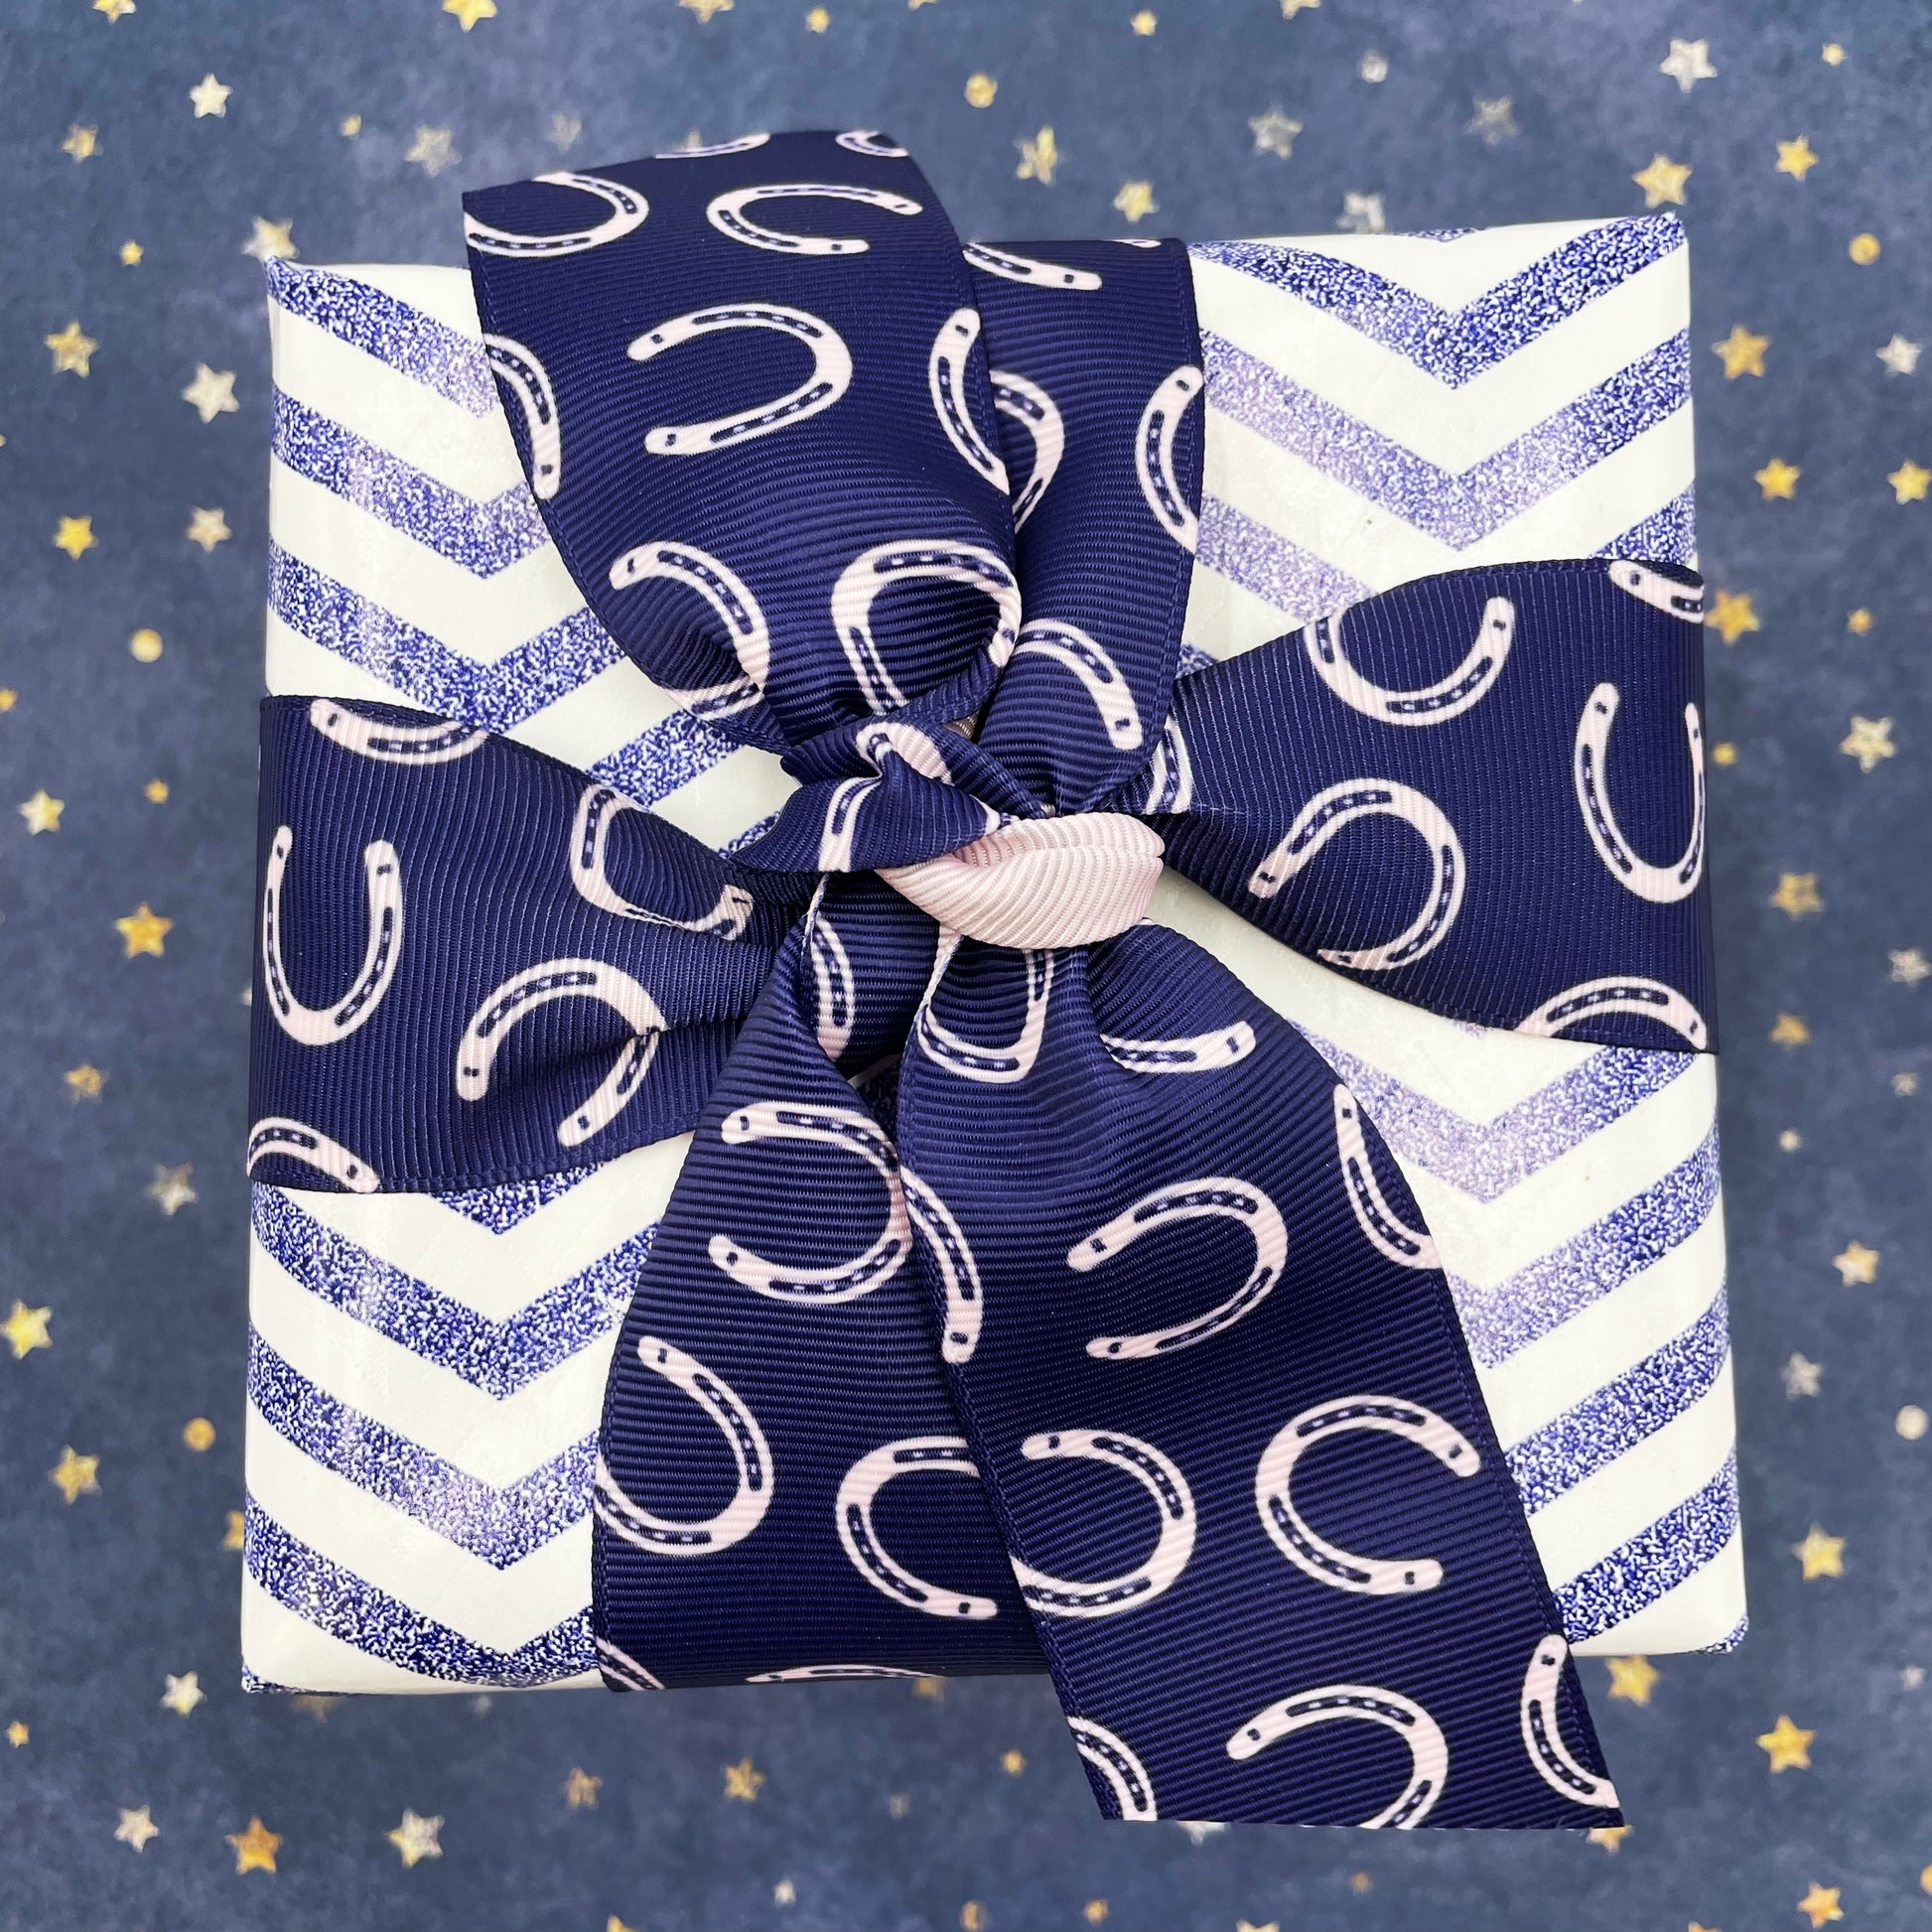 Equestrian ribbon horse shoes tossed on a navy blue background printed on  1.5 pink grosgrain, 10 yards